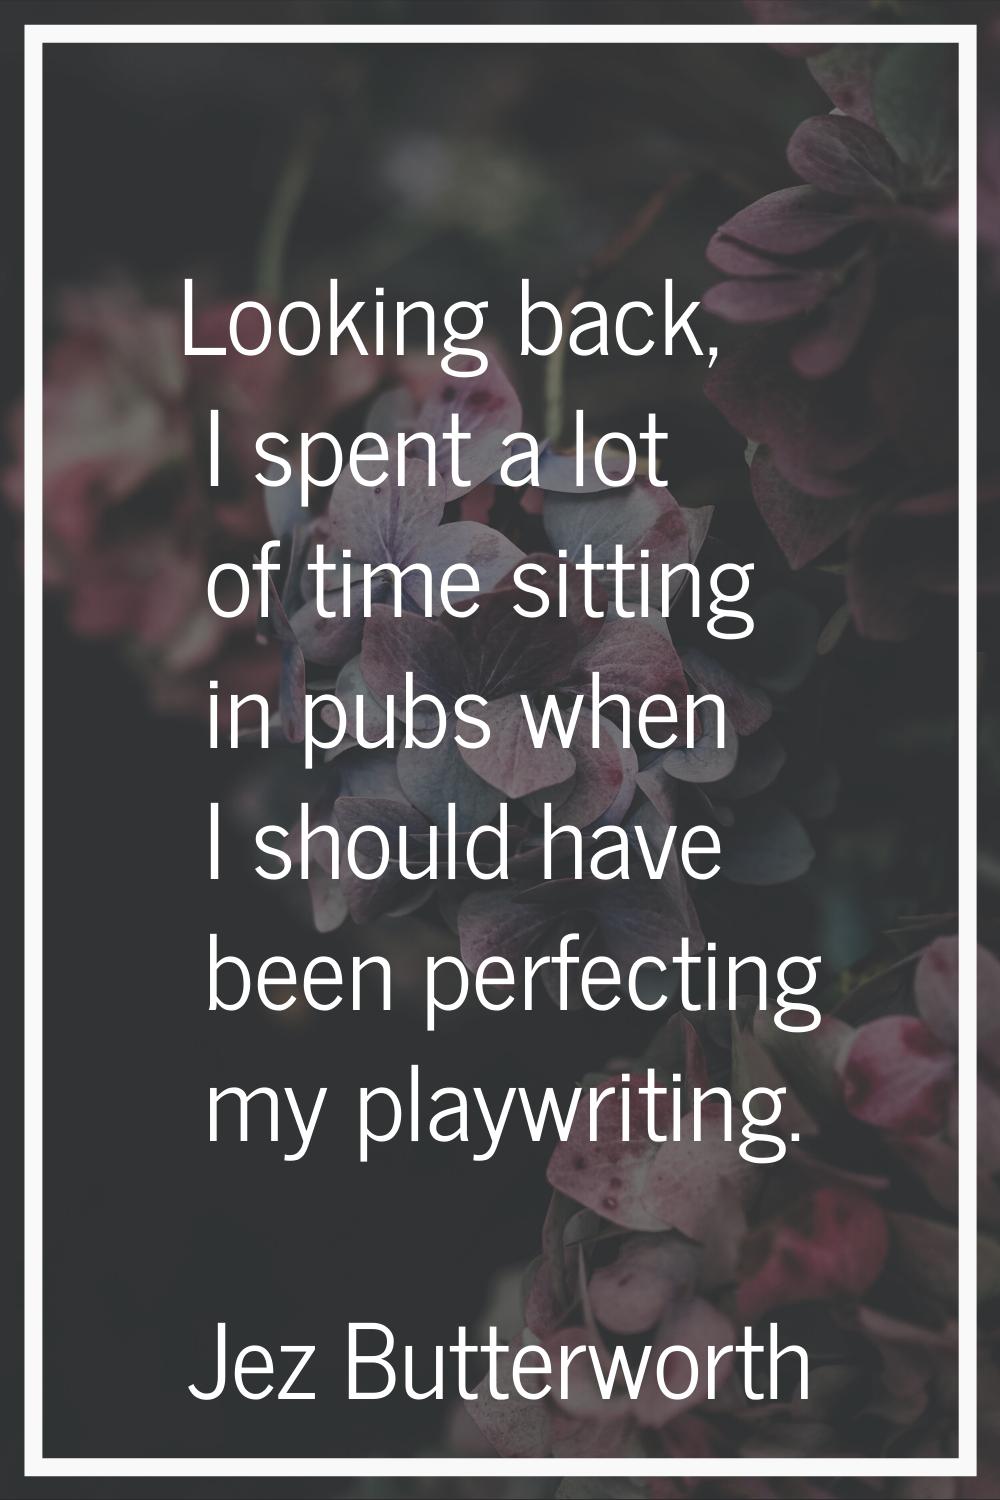 Looking back, I spent a lot of time sitting in pubs when I should have been perfecting my playwriti